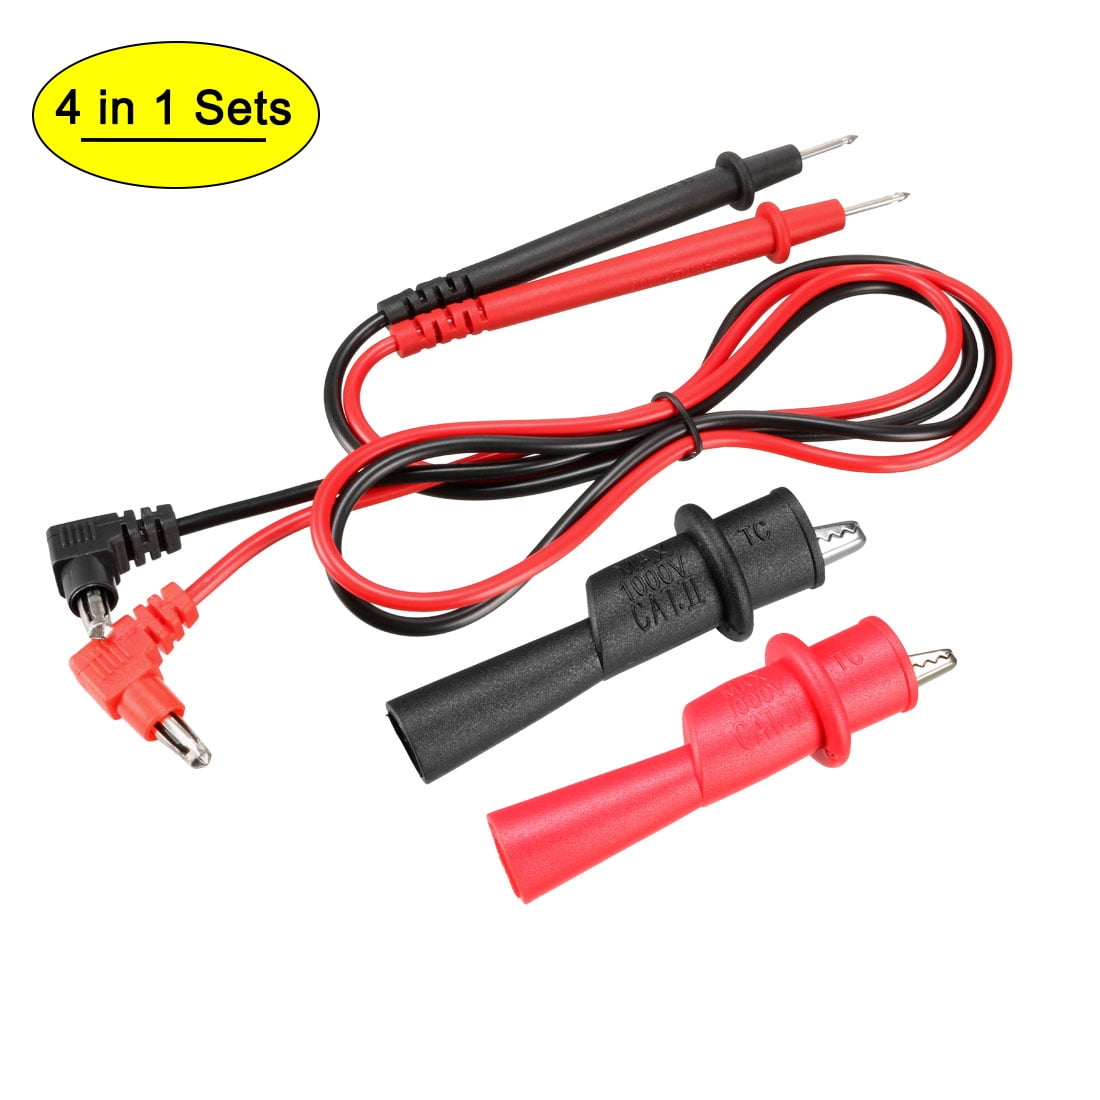 1Set Pop Banana Plug To Test Hook Clip Probe Lead Cable For Multimeter Red Black 